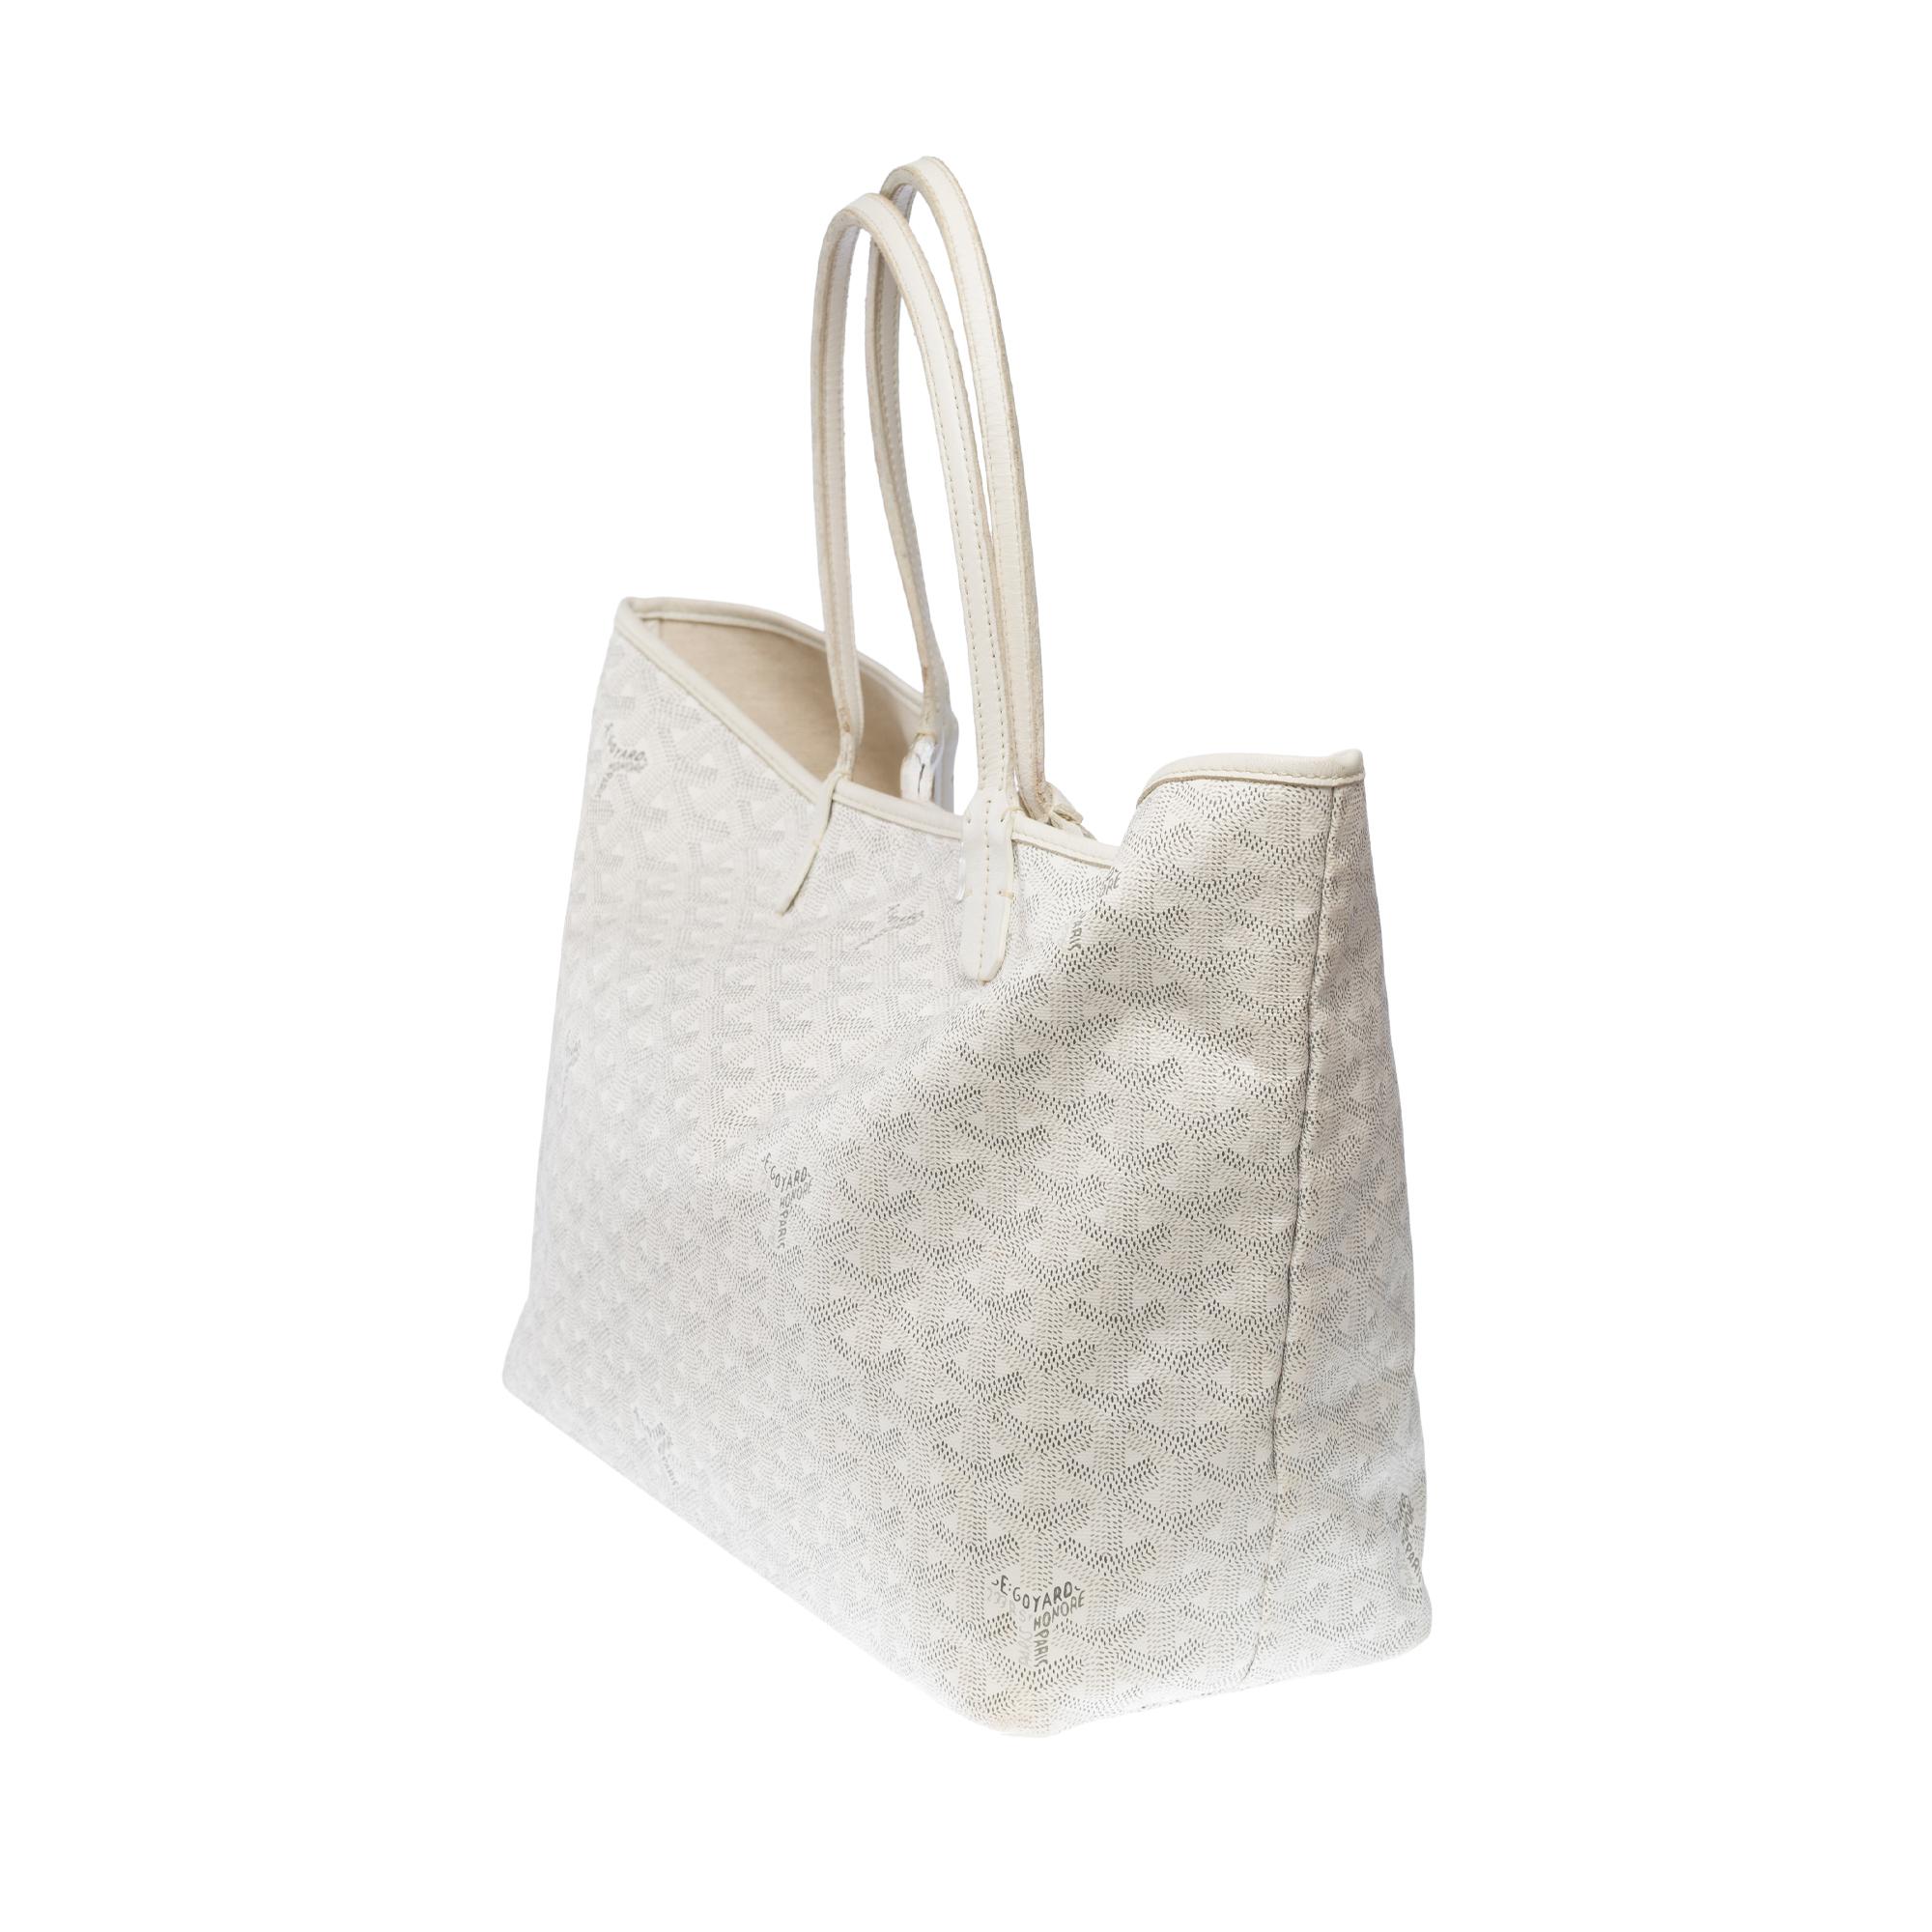 The Coveted Goyard Saint-Louis PM Tote bag in White canvas and leather, SHW 2